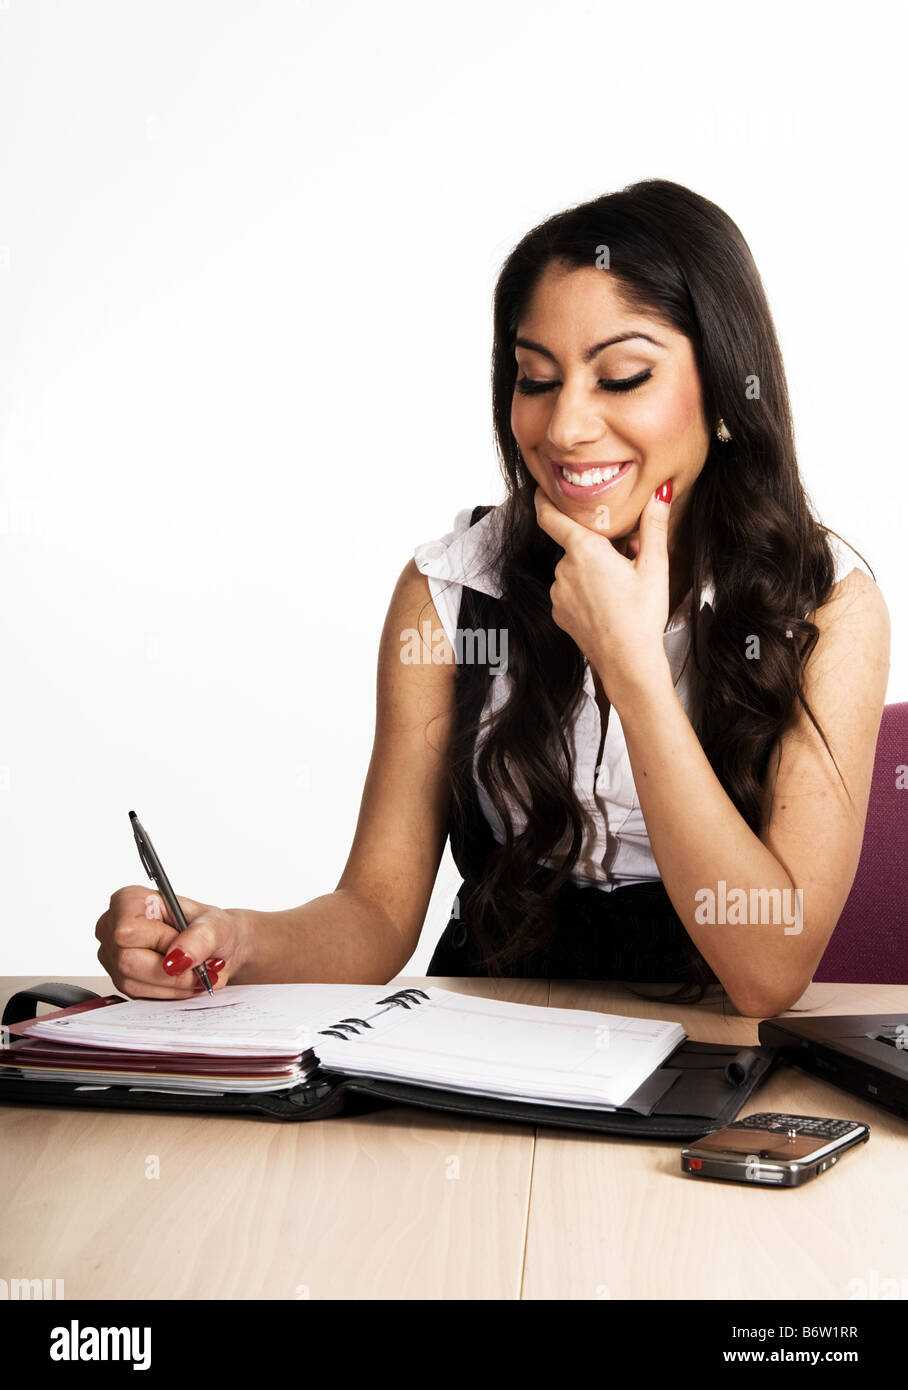 Business woman working on her calendar Stock Photo